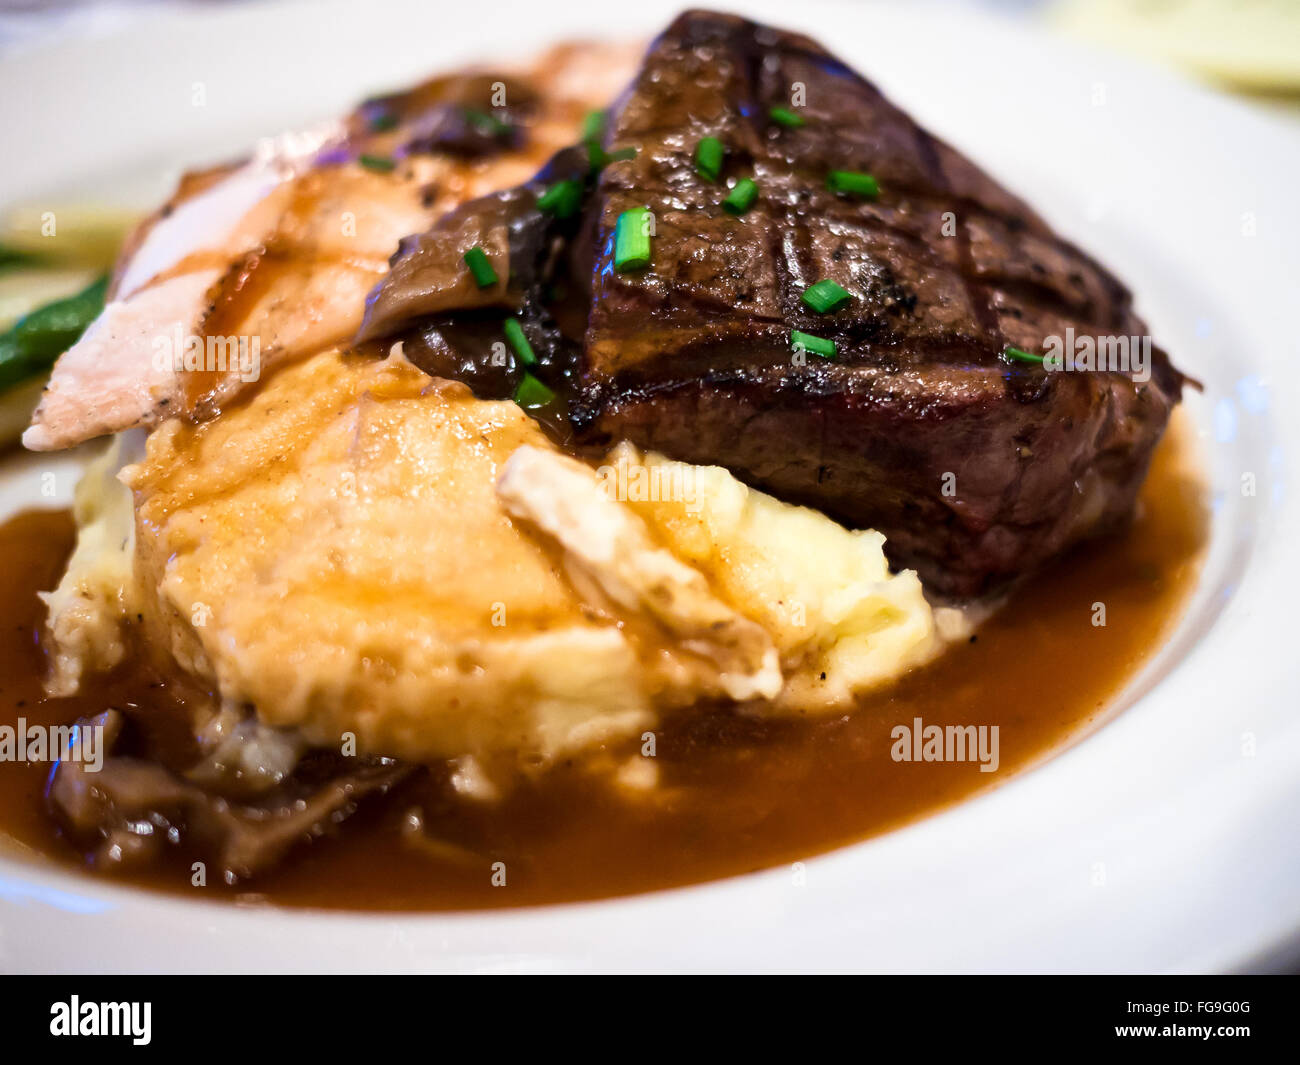 Steak, potatoes, and gravy on a white plate Stock Photo